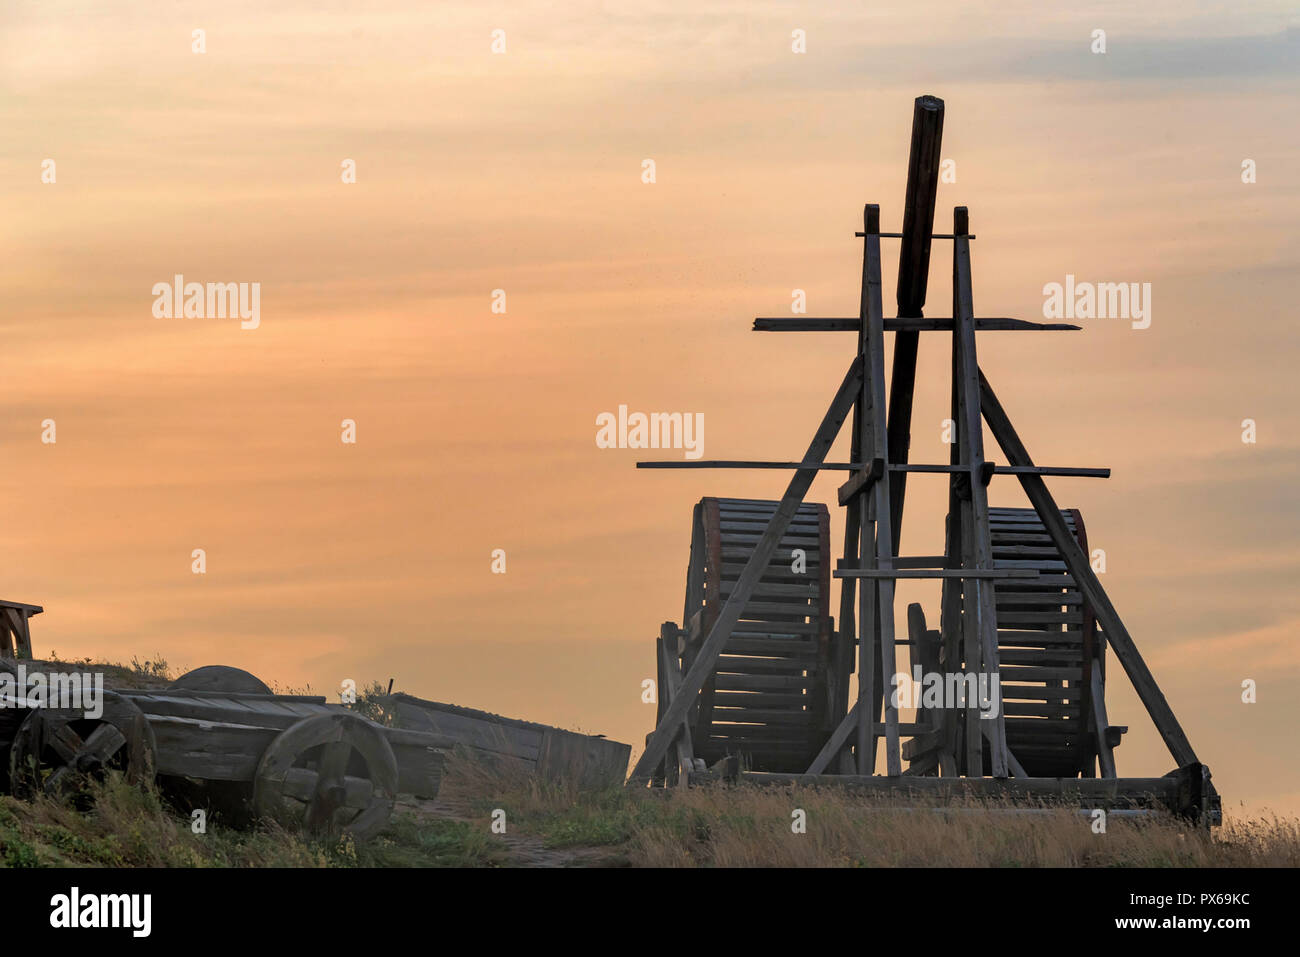 Old wooden catapult against sunset sky background Stock Photo